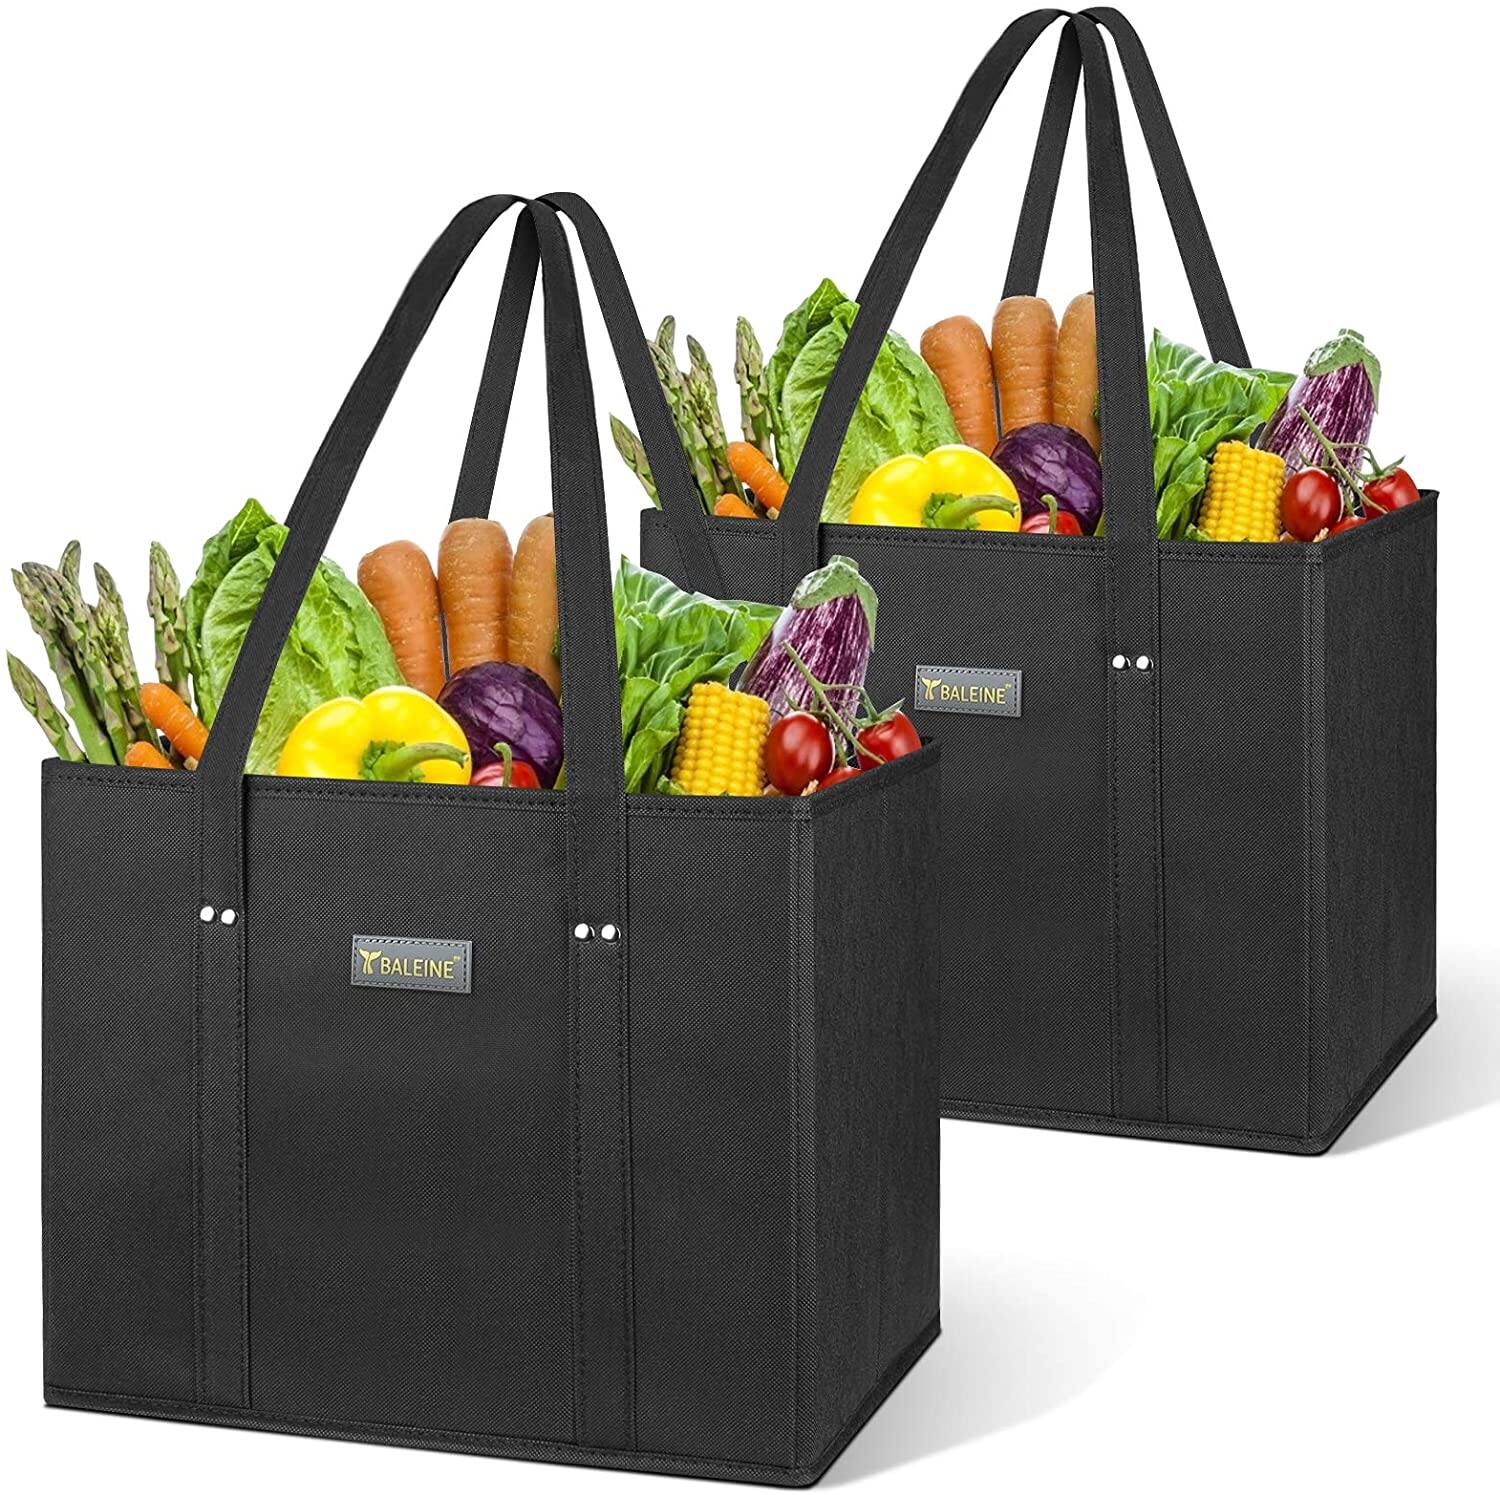 Reusable Shopping Box Bag Set with Reinforced Bottom & Handles (2 & 4 packs) from $11 + Free Shipping w/ Prime or Orders $25+